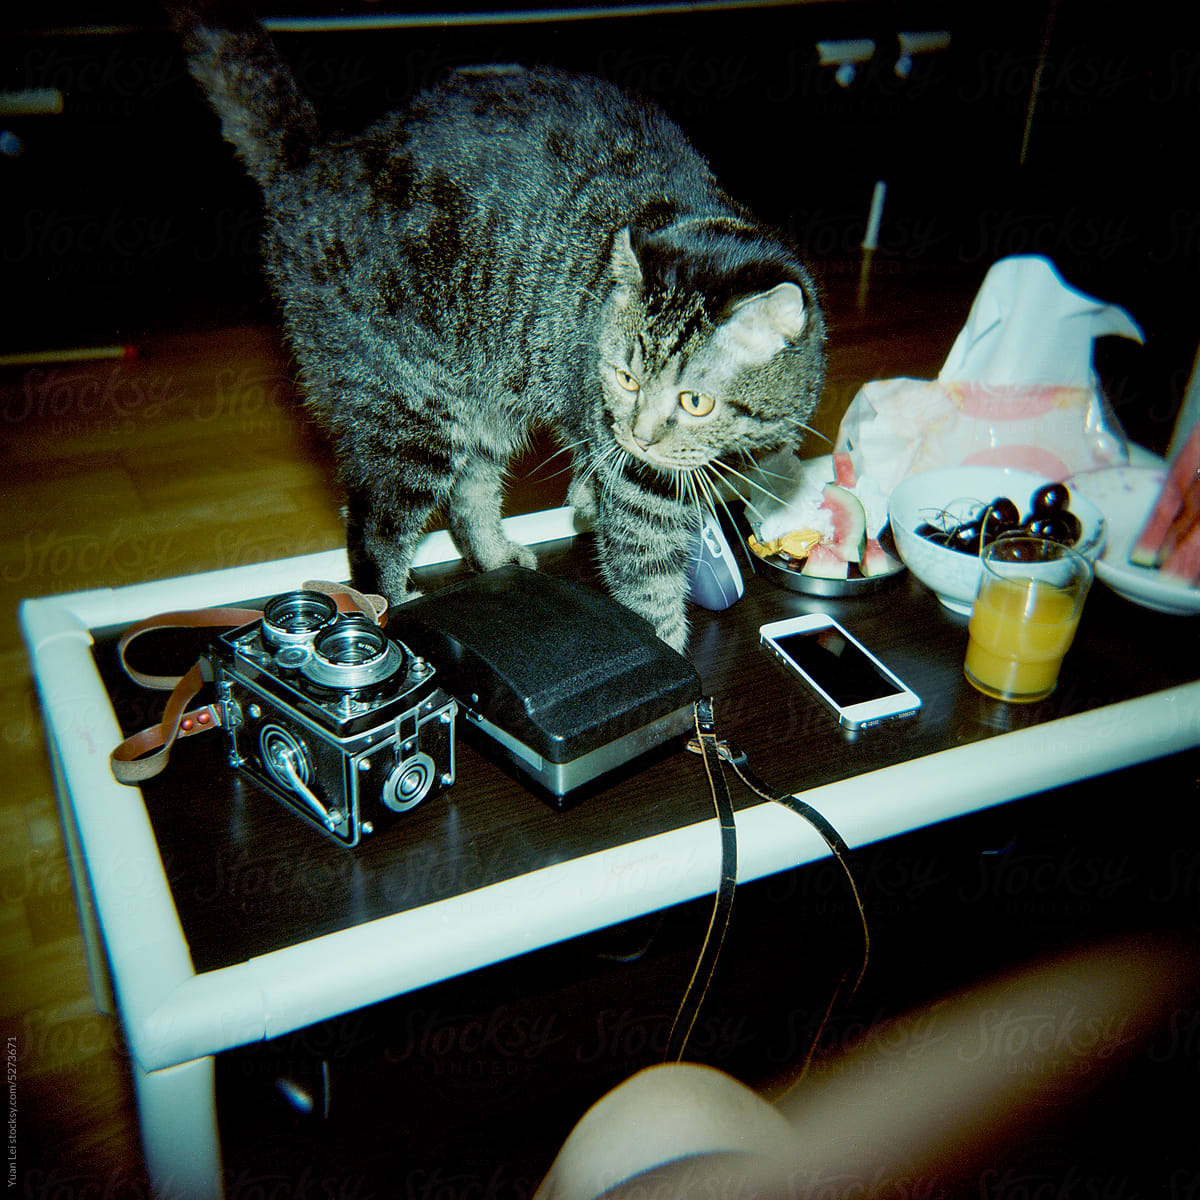 There are cats and various cameras on the table